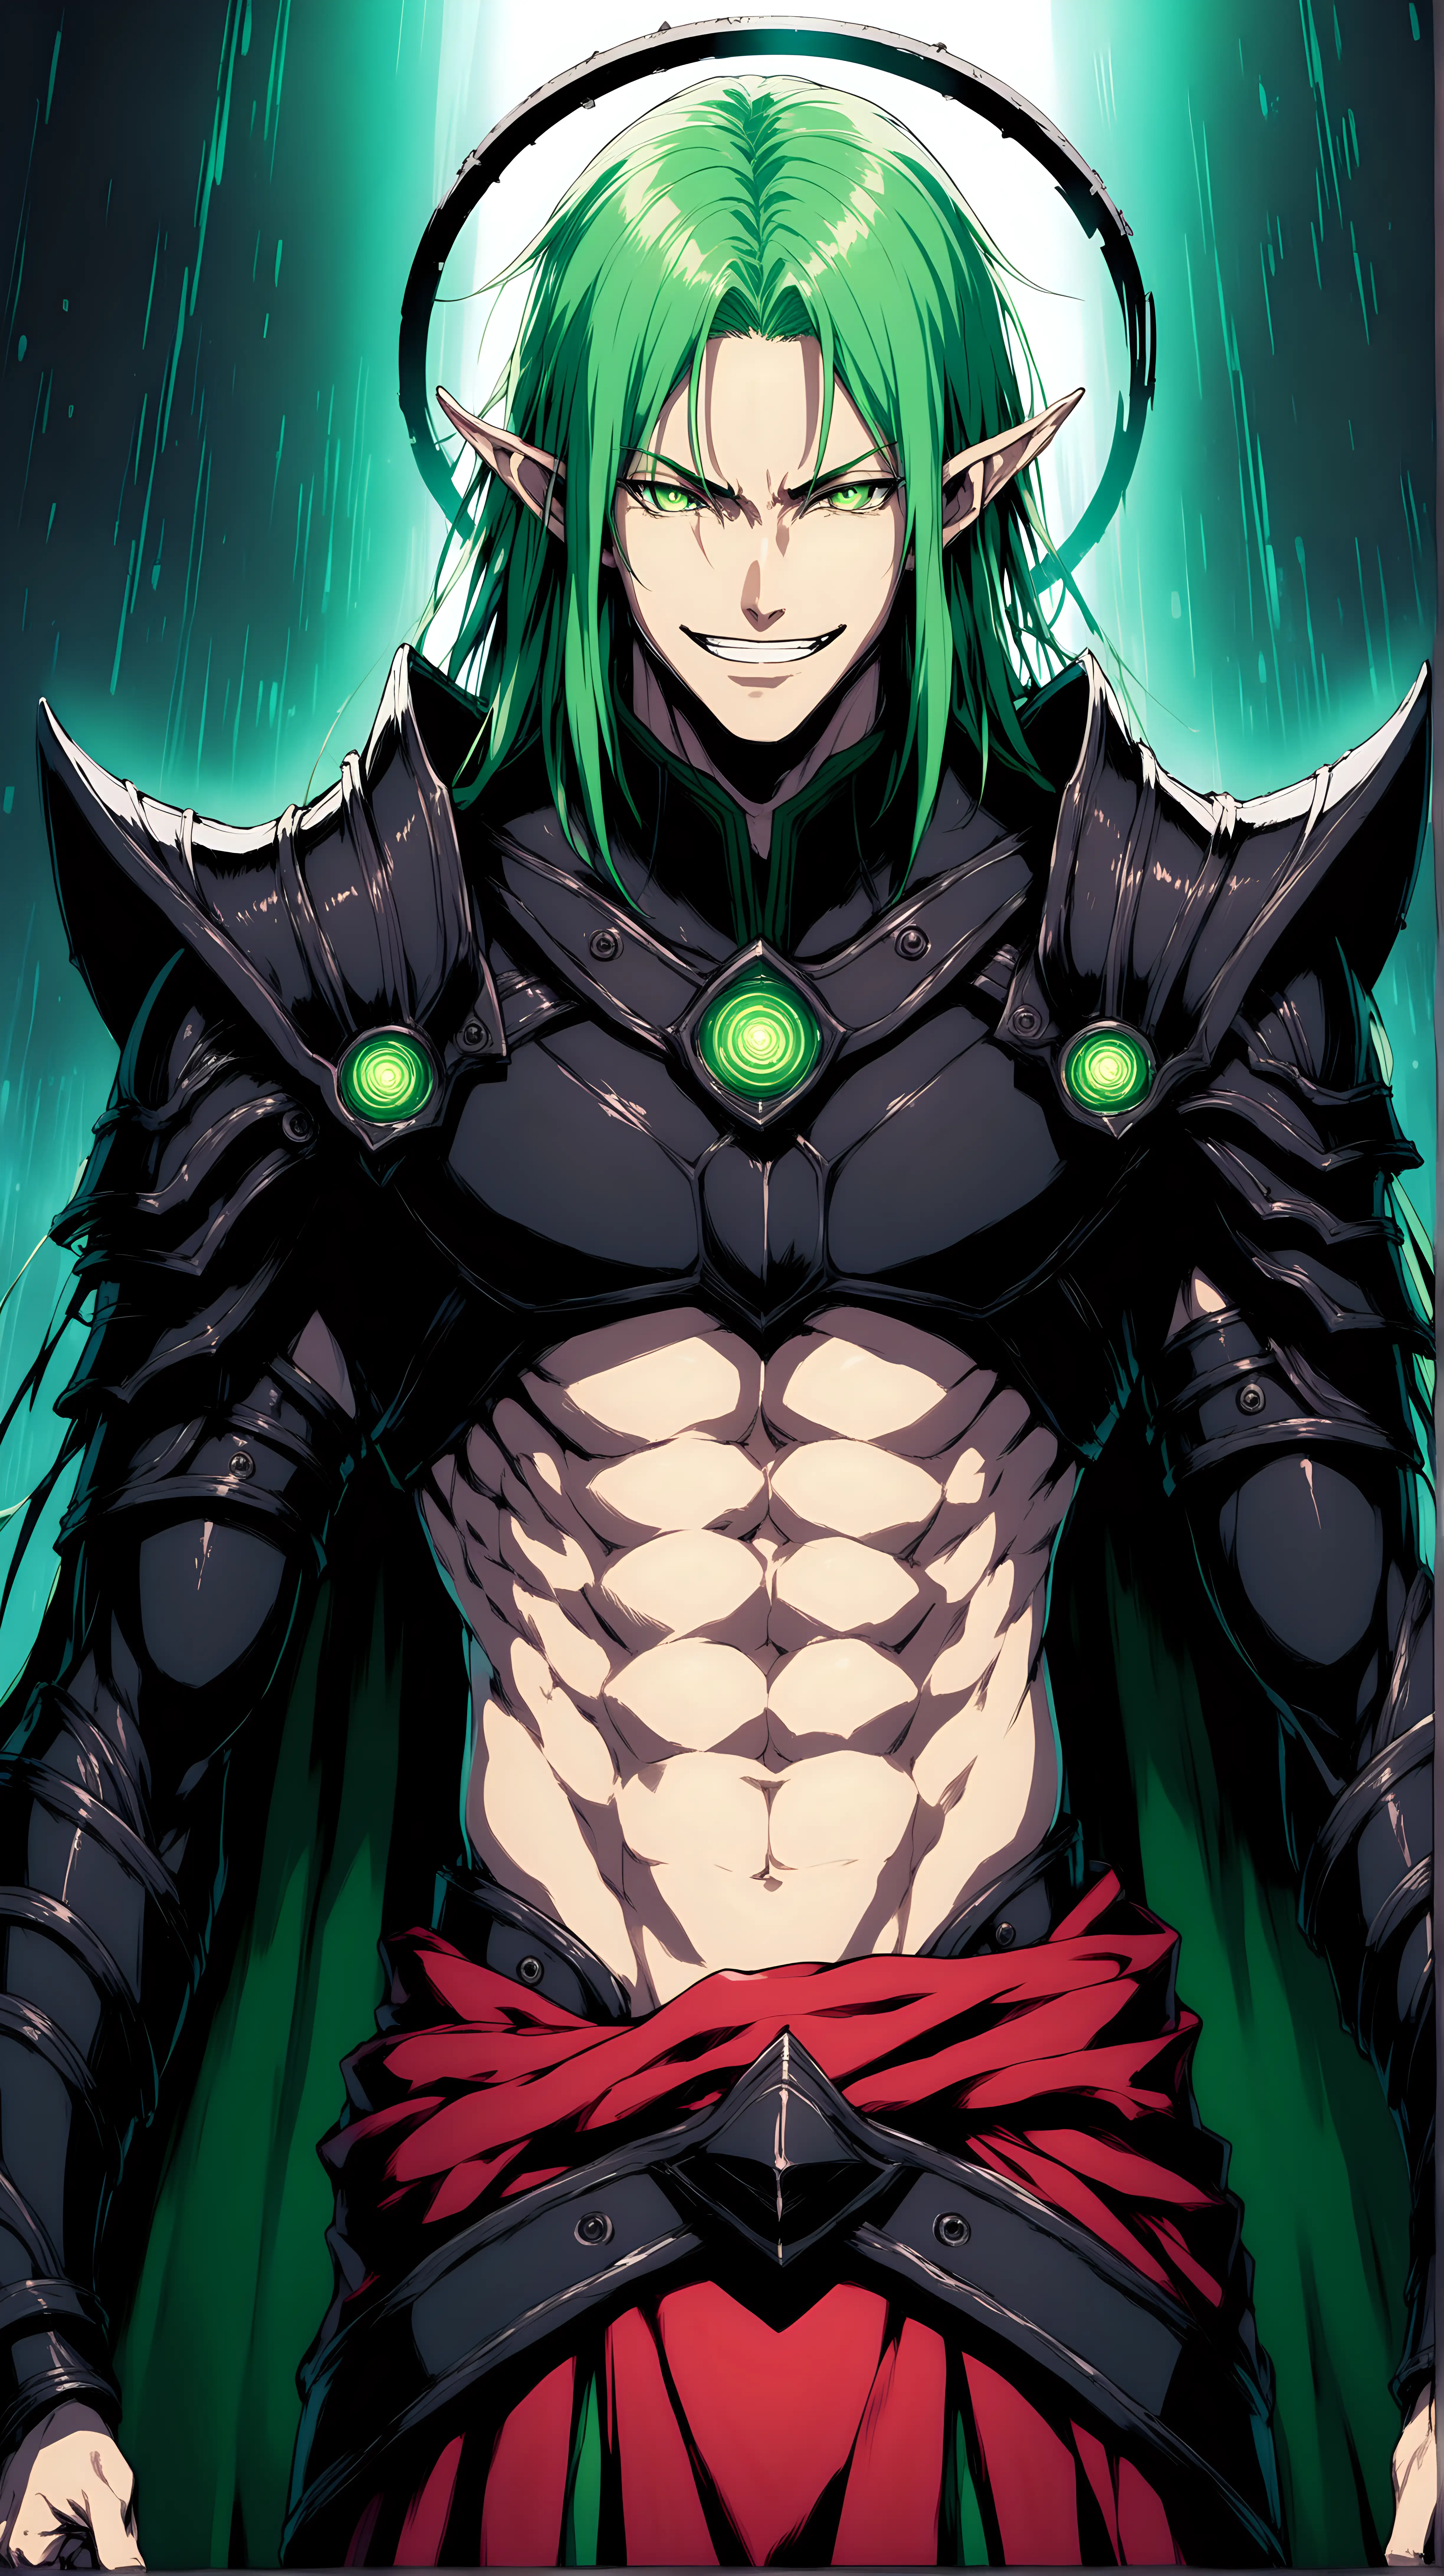 "Create a male elf with an intense, possessive expression and a hint of madness in his eyes. he is looking directly at the camera with green eyes, reminiscent of the gapmoe yandere trope. His eyes are huge and luminous, conveying a sense of sadness. The character should have an anime visual style resembling an alluring man, akin to characters from "No Game No Life," but with a grimdark twist characteristic of the gapmoe yandere trope. Emphasize his muscular physique, particularly his well-defined abs. Dress him in dark, gothic black leather armor, including a long red skirt, bracers, greaves, and pauldrons. Ensure his mint green hair flows freely down to his feet, standing out vibrantly against the dark backdrop. Adorn his head with a unique black metal halo attachment, designed to hover behind his head. Ensure he has long elf ears and a unique black metal halo floating above his head. His right hand should be positioned on his face, emphasizing his expression of madness and possessiveness. The expression should evoke a sense of close-up intimacy similar to Iwakura Lain from "Serial Experiments Lain" or Hajime Yatate's style, with a perverse wide grin on his lips. Capture the dynamic and detailed art of "Bastard!!", with vibrant colors and intricate linework. Place the character within a dark fantasy setting, with atmospheric backgrounds that complement his dark aesthetic. Depict him as a formidable warrior with a touch of madness, similar to a mature man in an anime visual. Ensure the shot is a full-body shot, emphasizing his entire figure." show six pack abs, right hand on cheek, exposed midriff. light mint green hair!